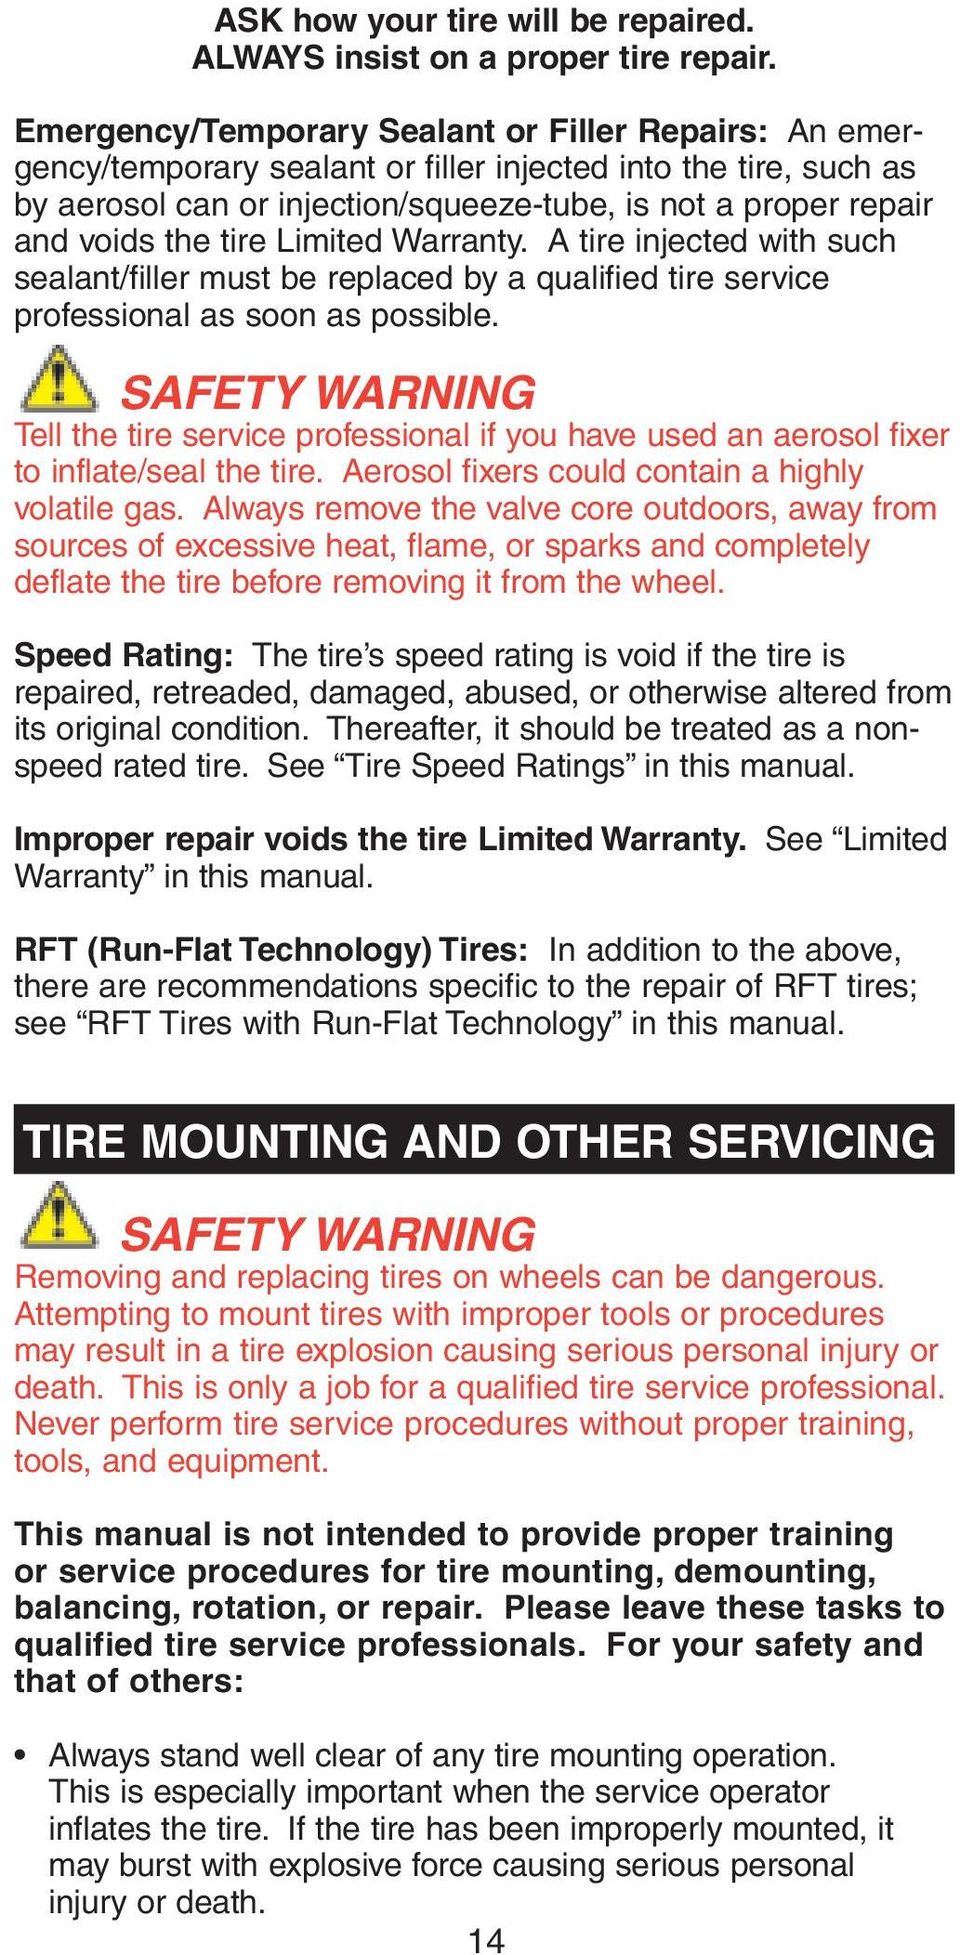 tire Limited Warranty. A tire injected with such sealant/filler must be replaced by a qualified tire service professional as soon as possible.